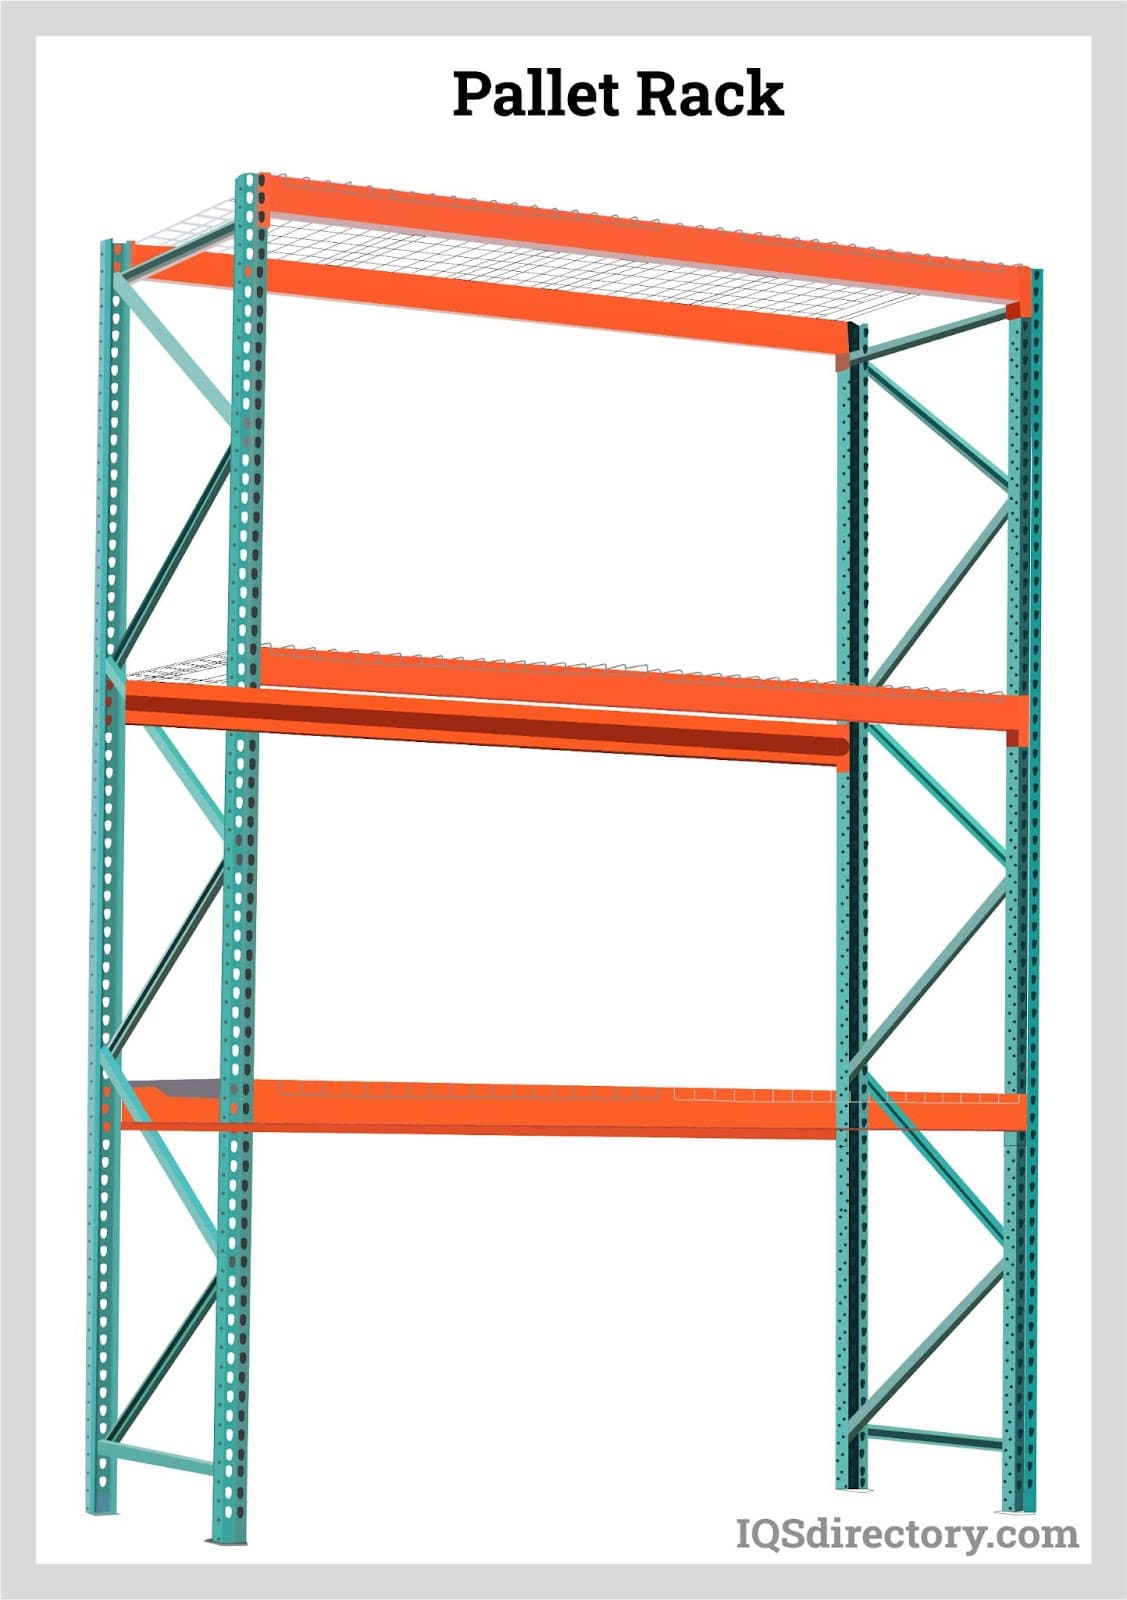 Pallet Racks: Types, Uses, Features and Benefits